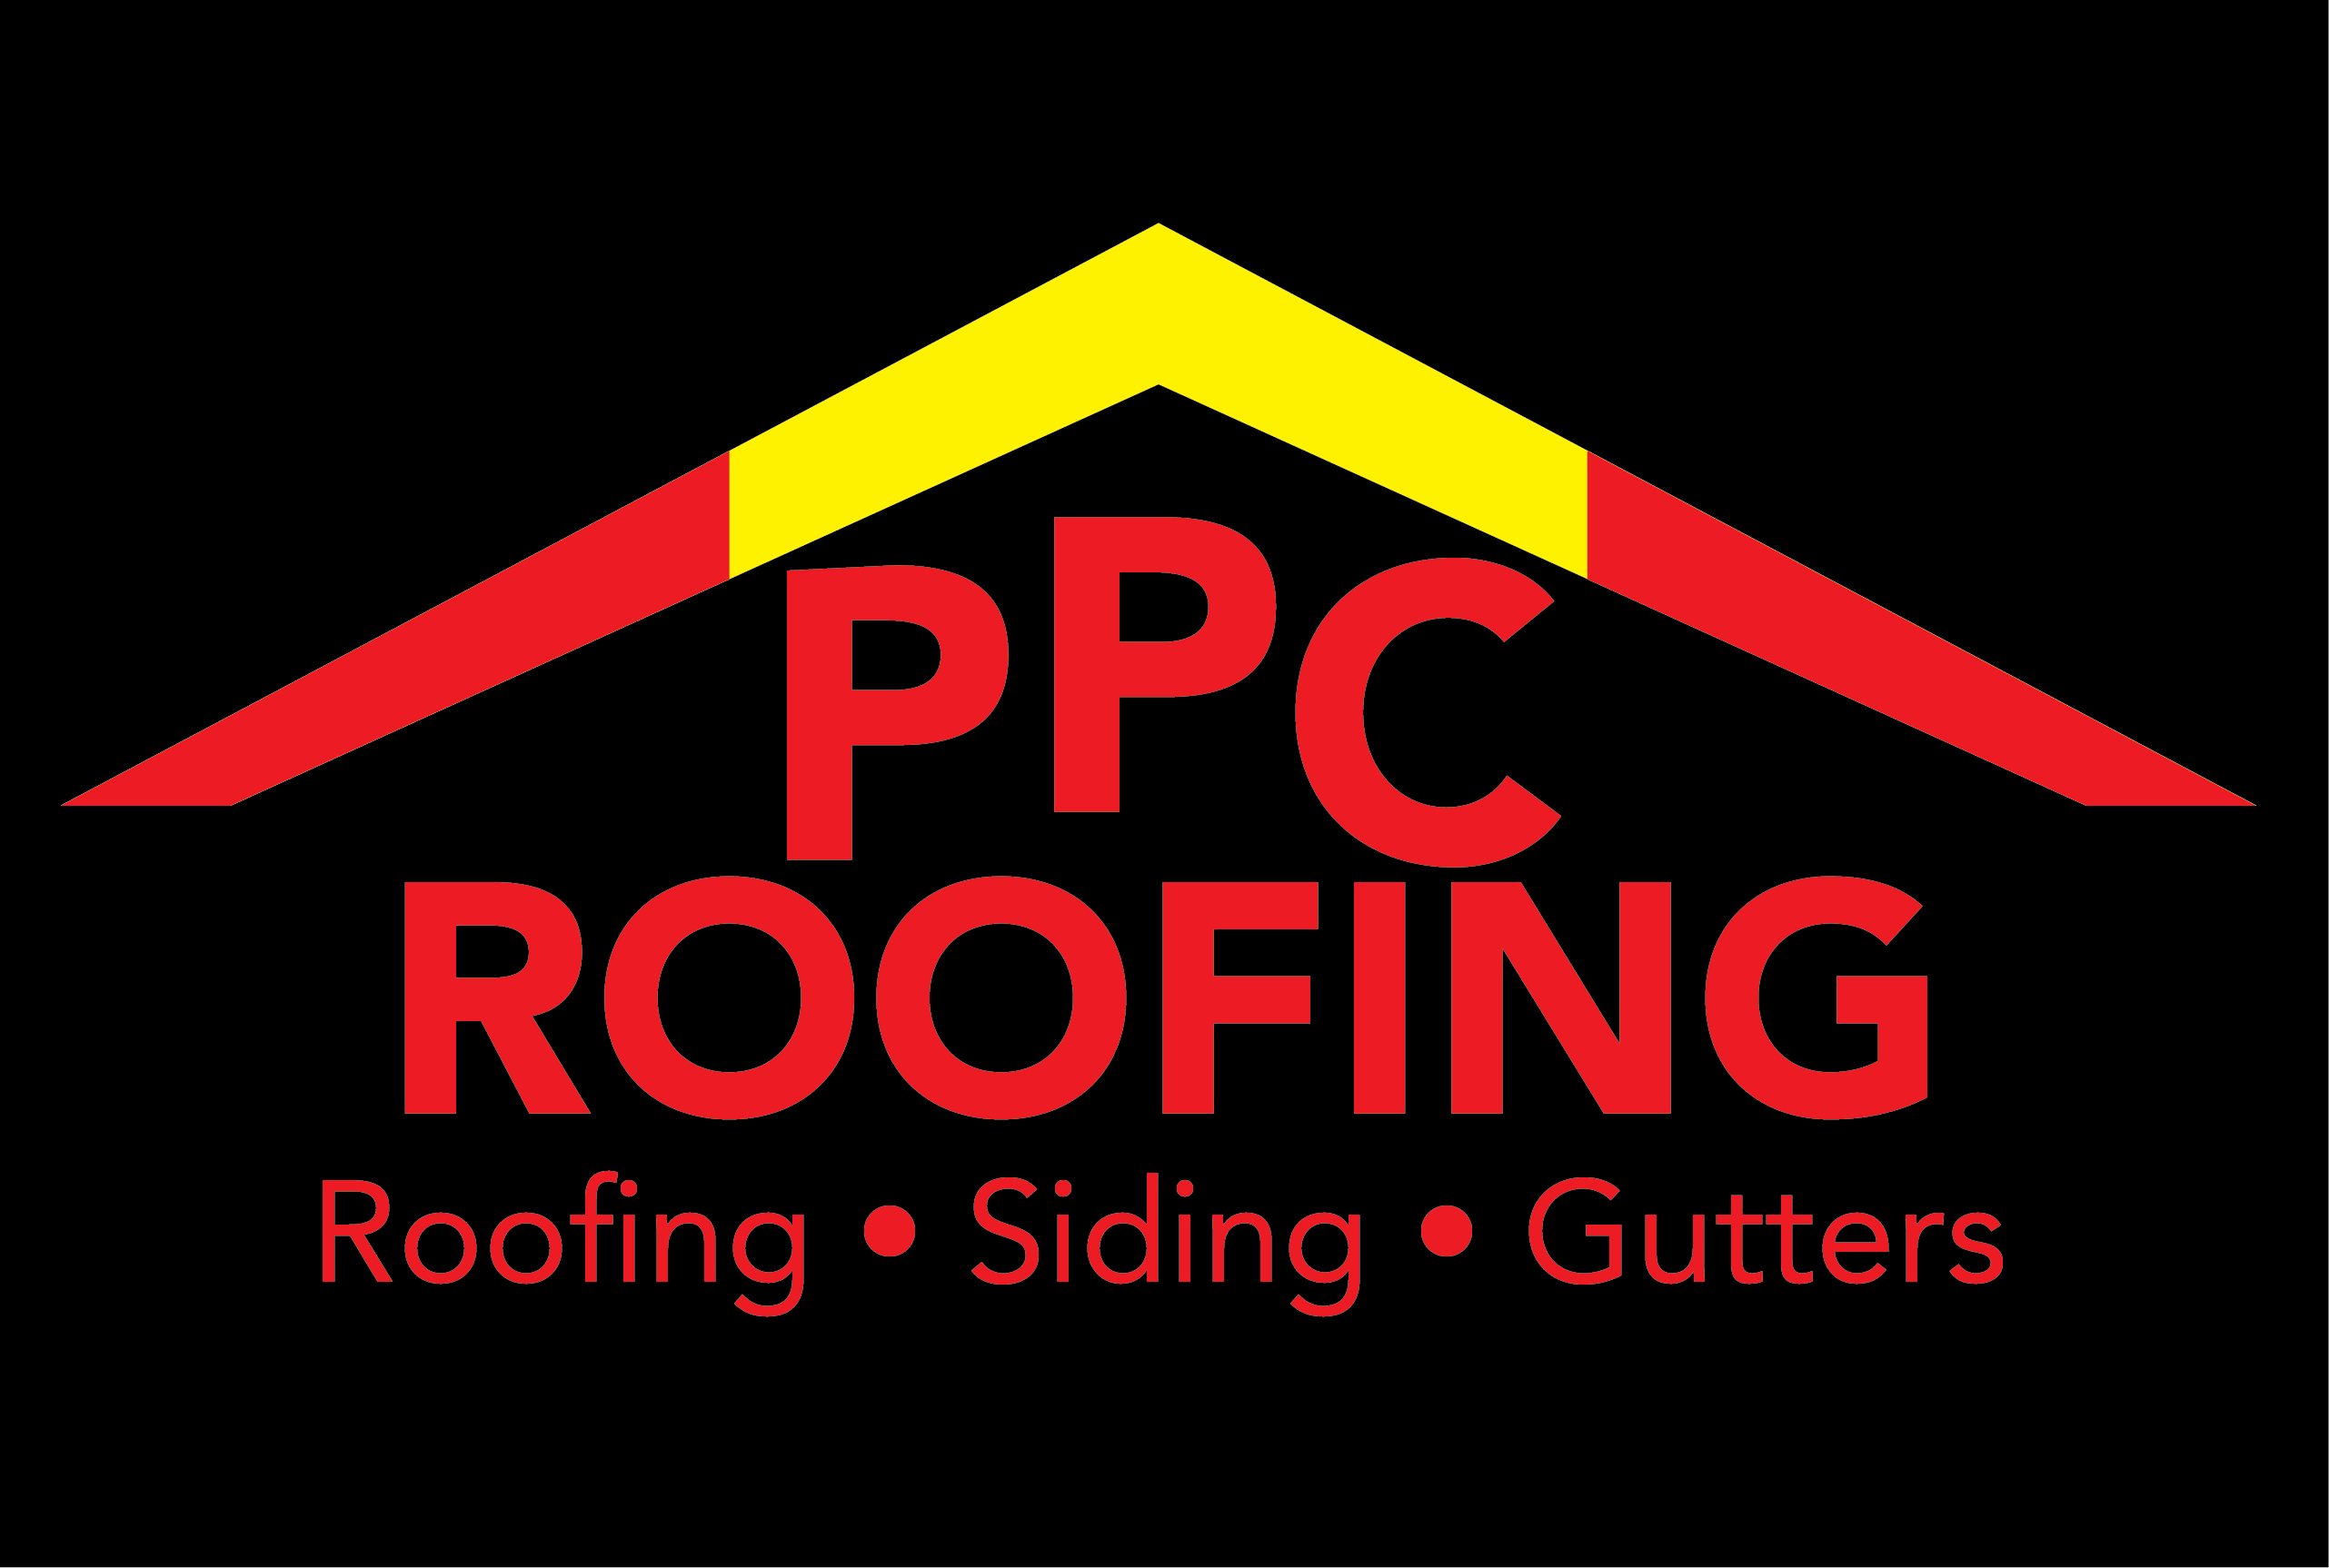 PPC Roofing